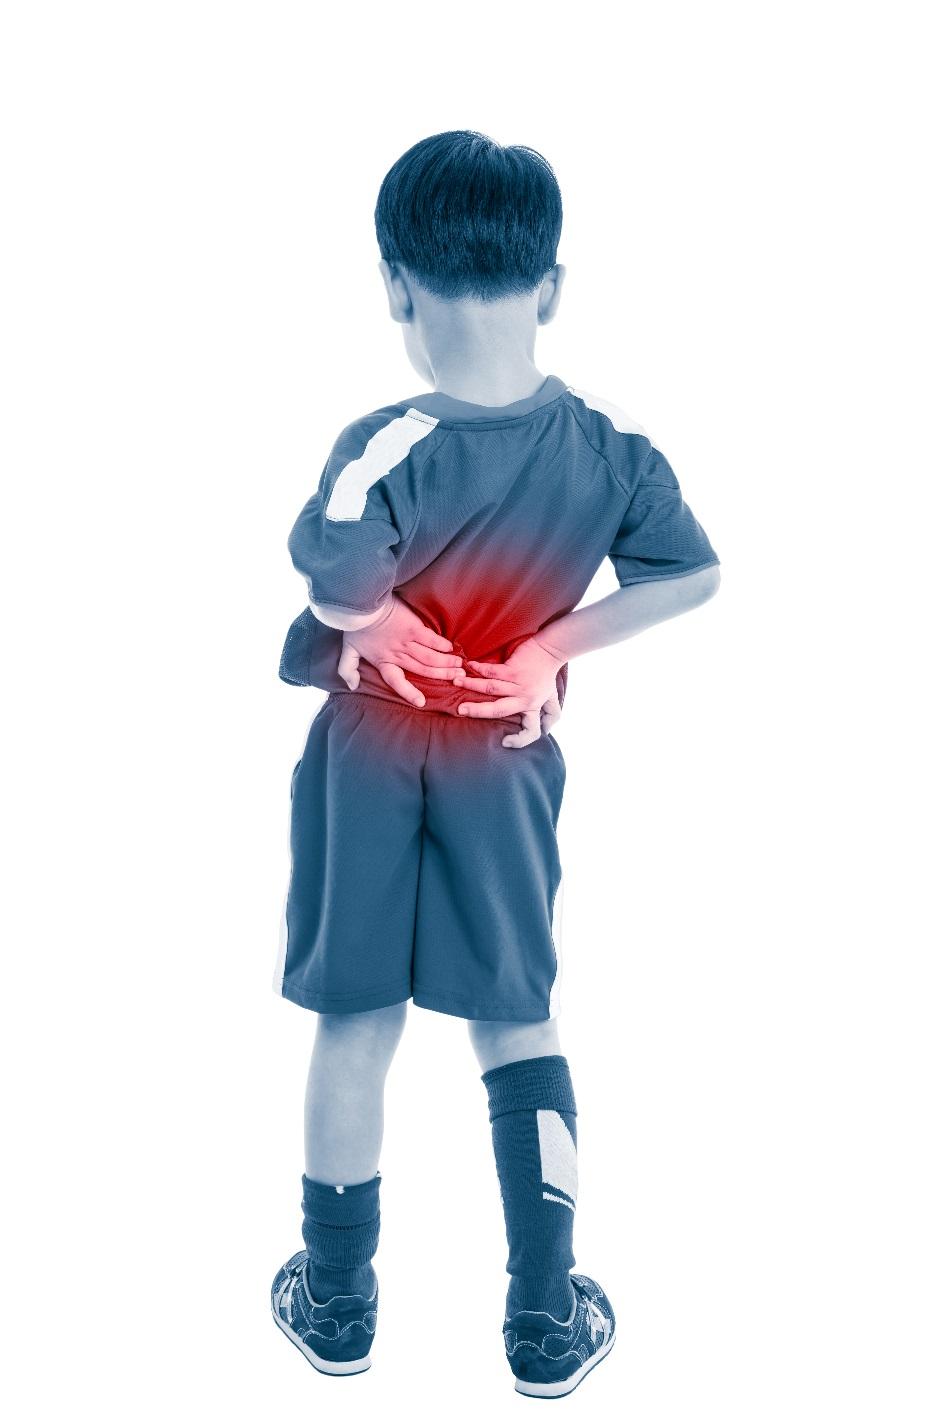 My Child Has Back Pain Soft Tissue Injuries